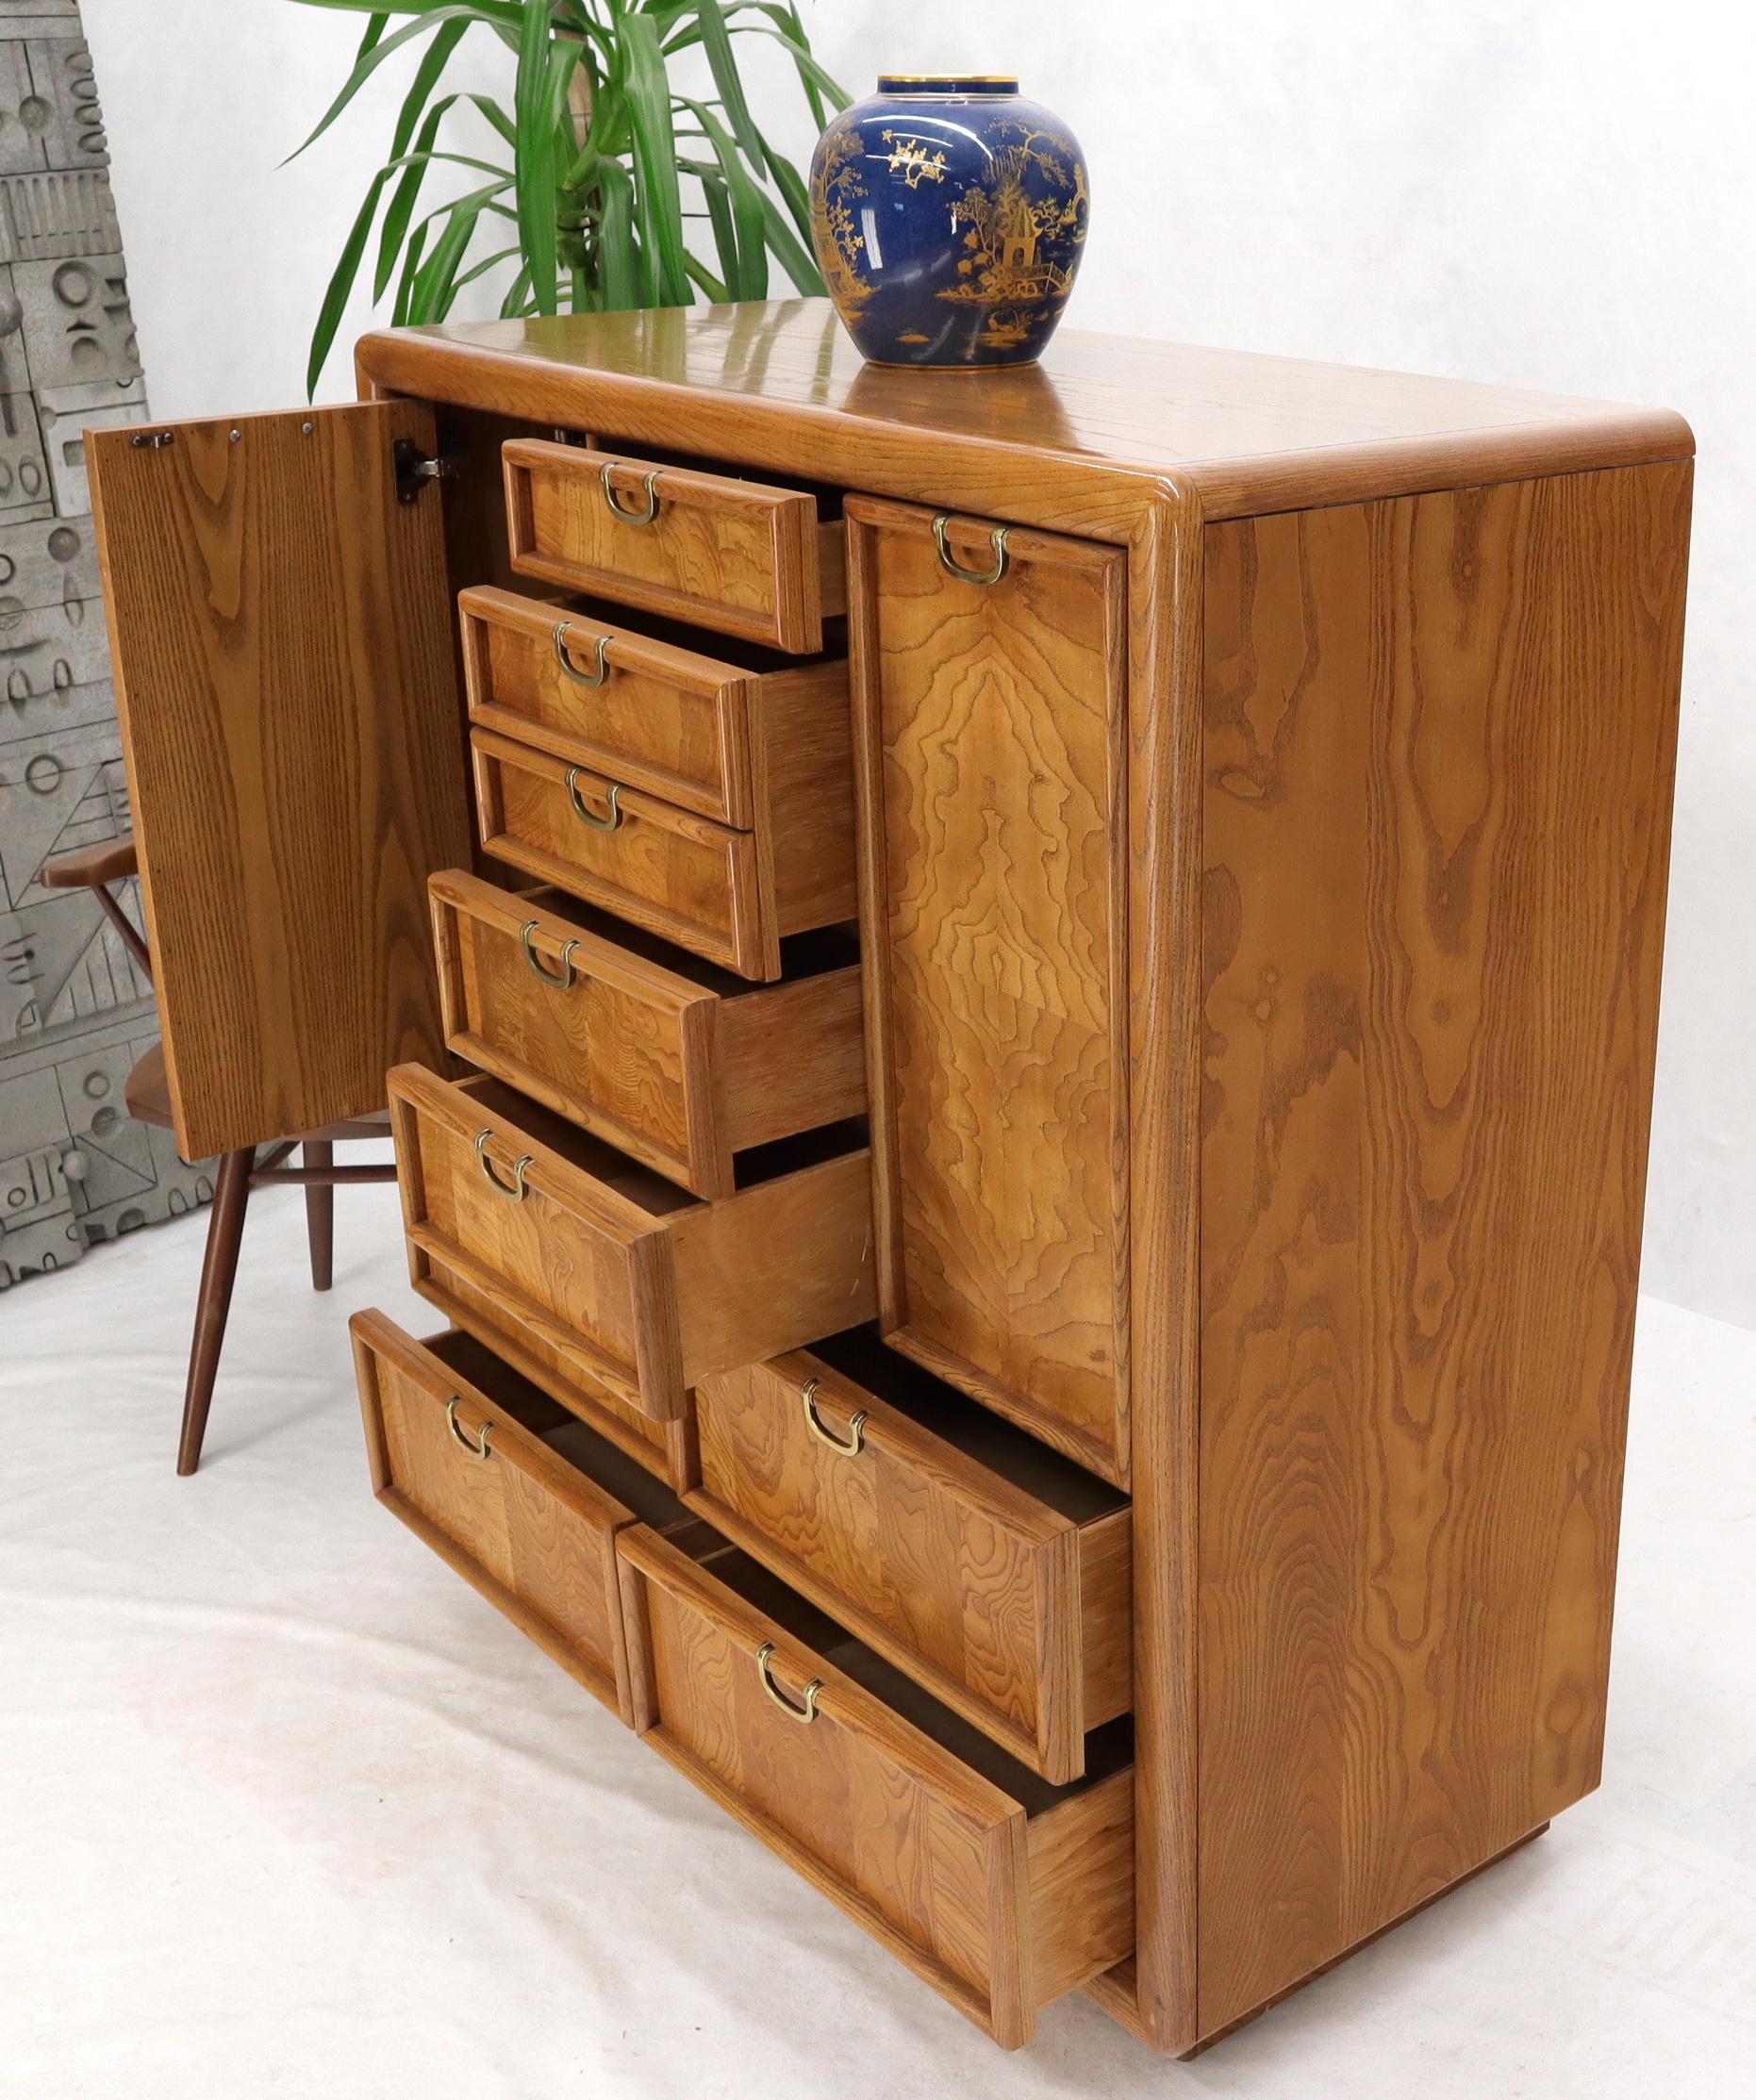 Oak & burl wood multi-drawer chest credenza by Broyhill Premier. Stunning wood grain pattern and condition.